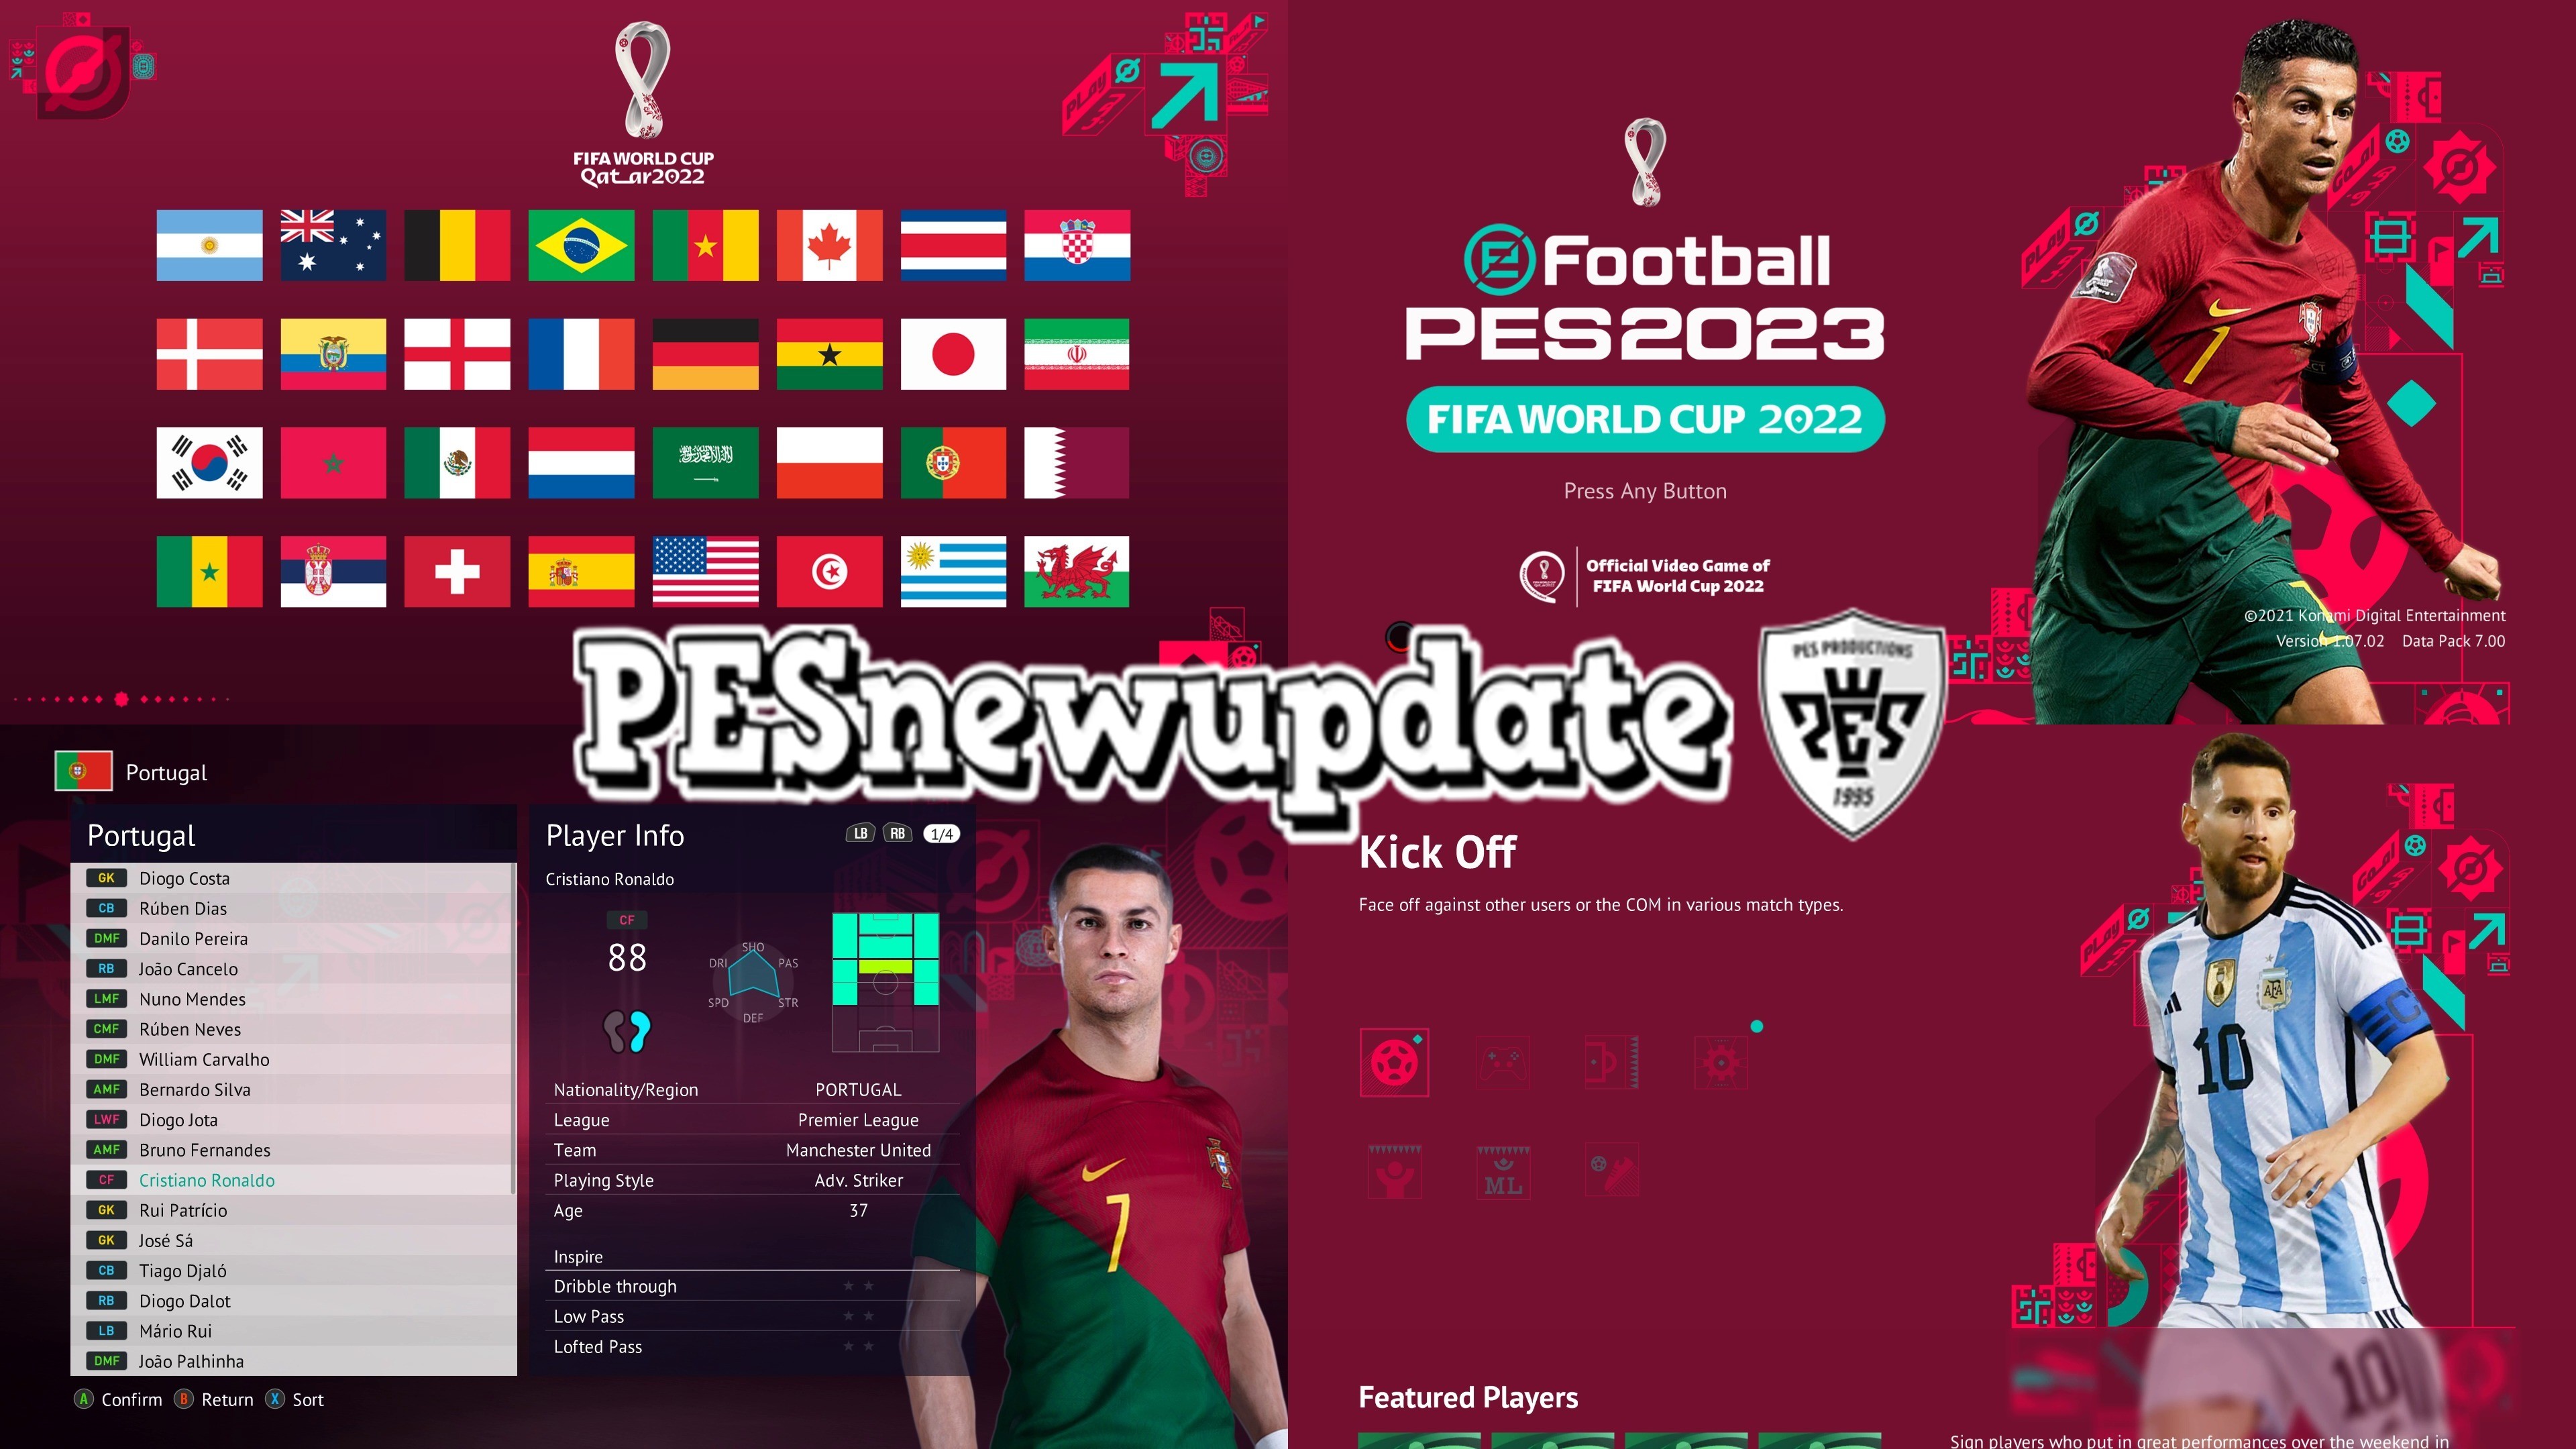 PES 2021 Menu World Cup 2022 by PESNewupdate ~ PESNewupdate Free Download Latest Pro Evolution Soccer Patch and Updates